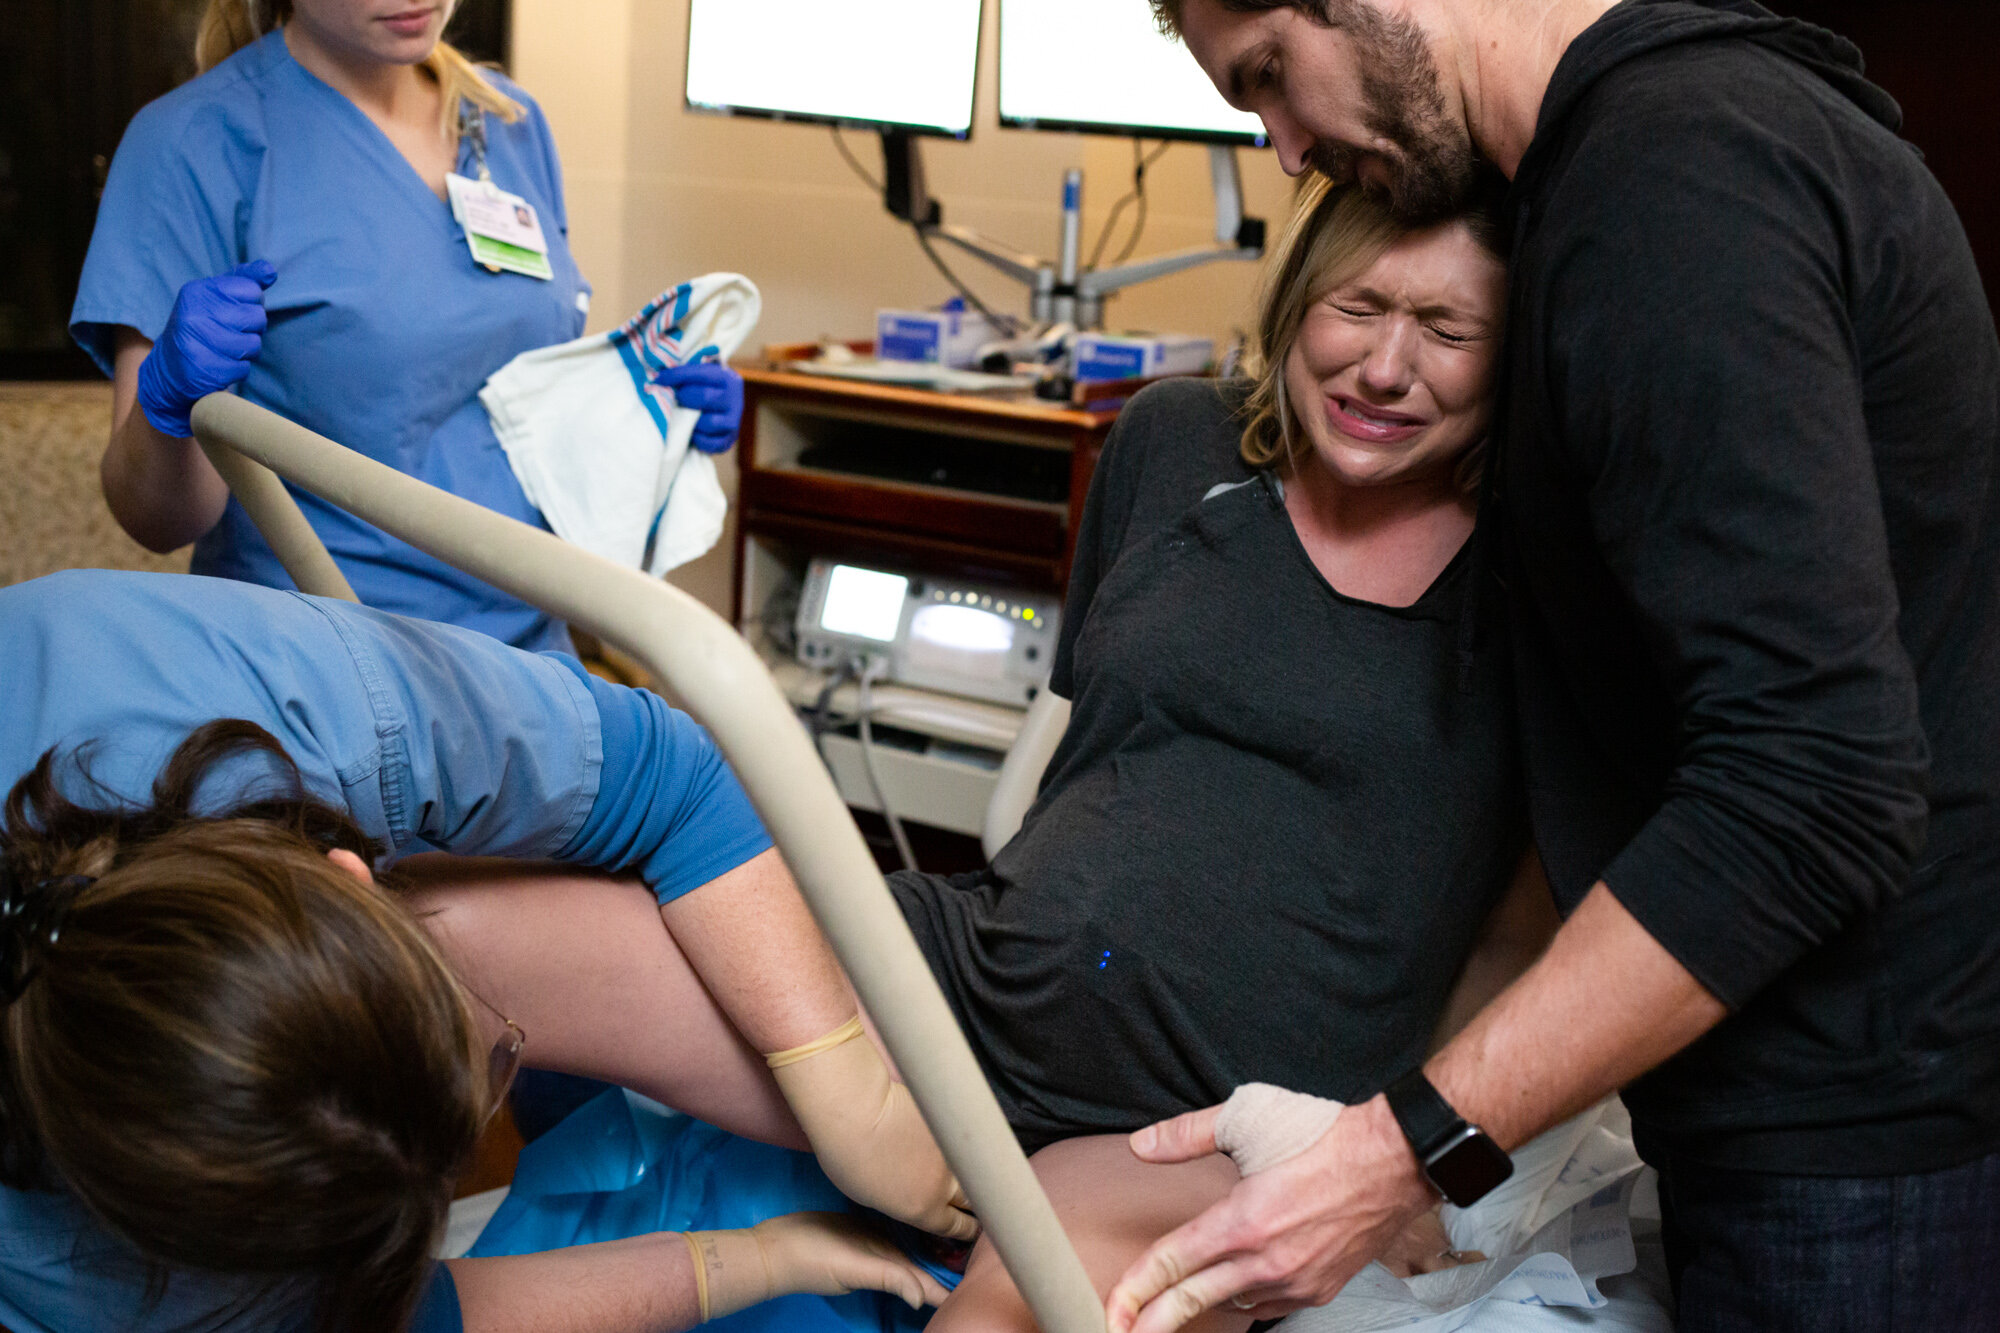 laboring mom with look of anguish as she pushes her baby down